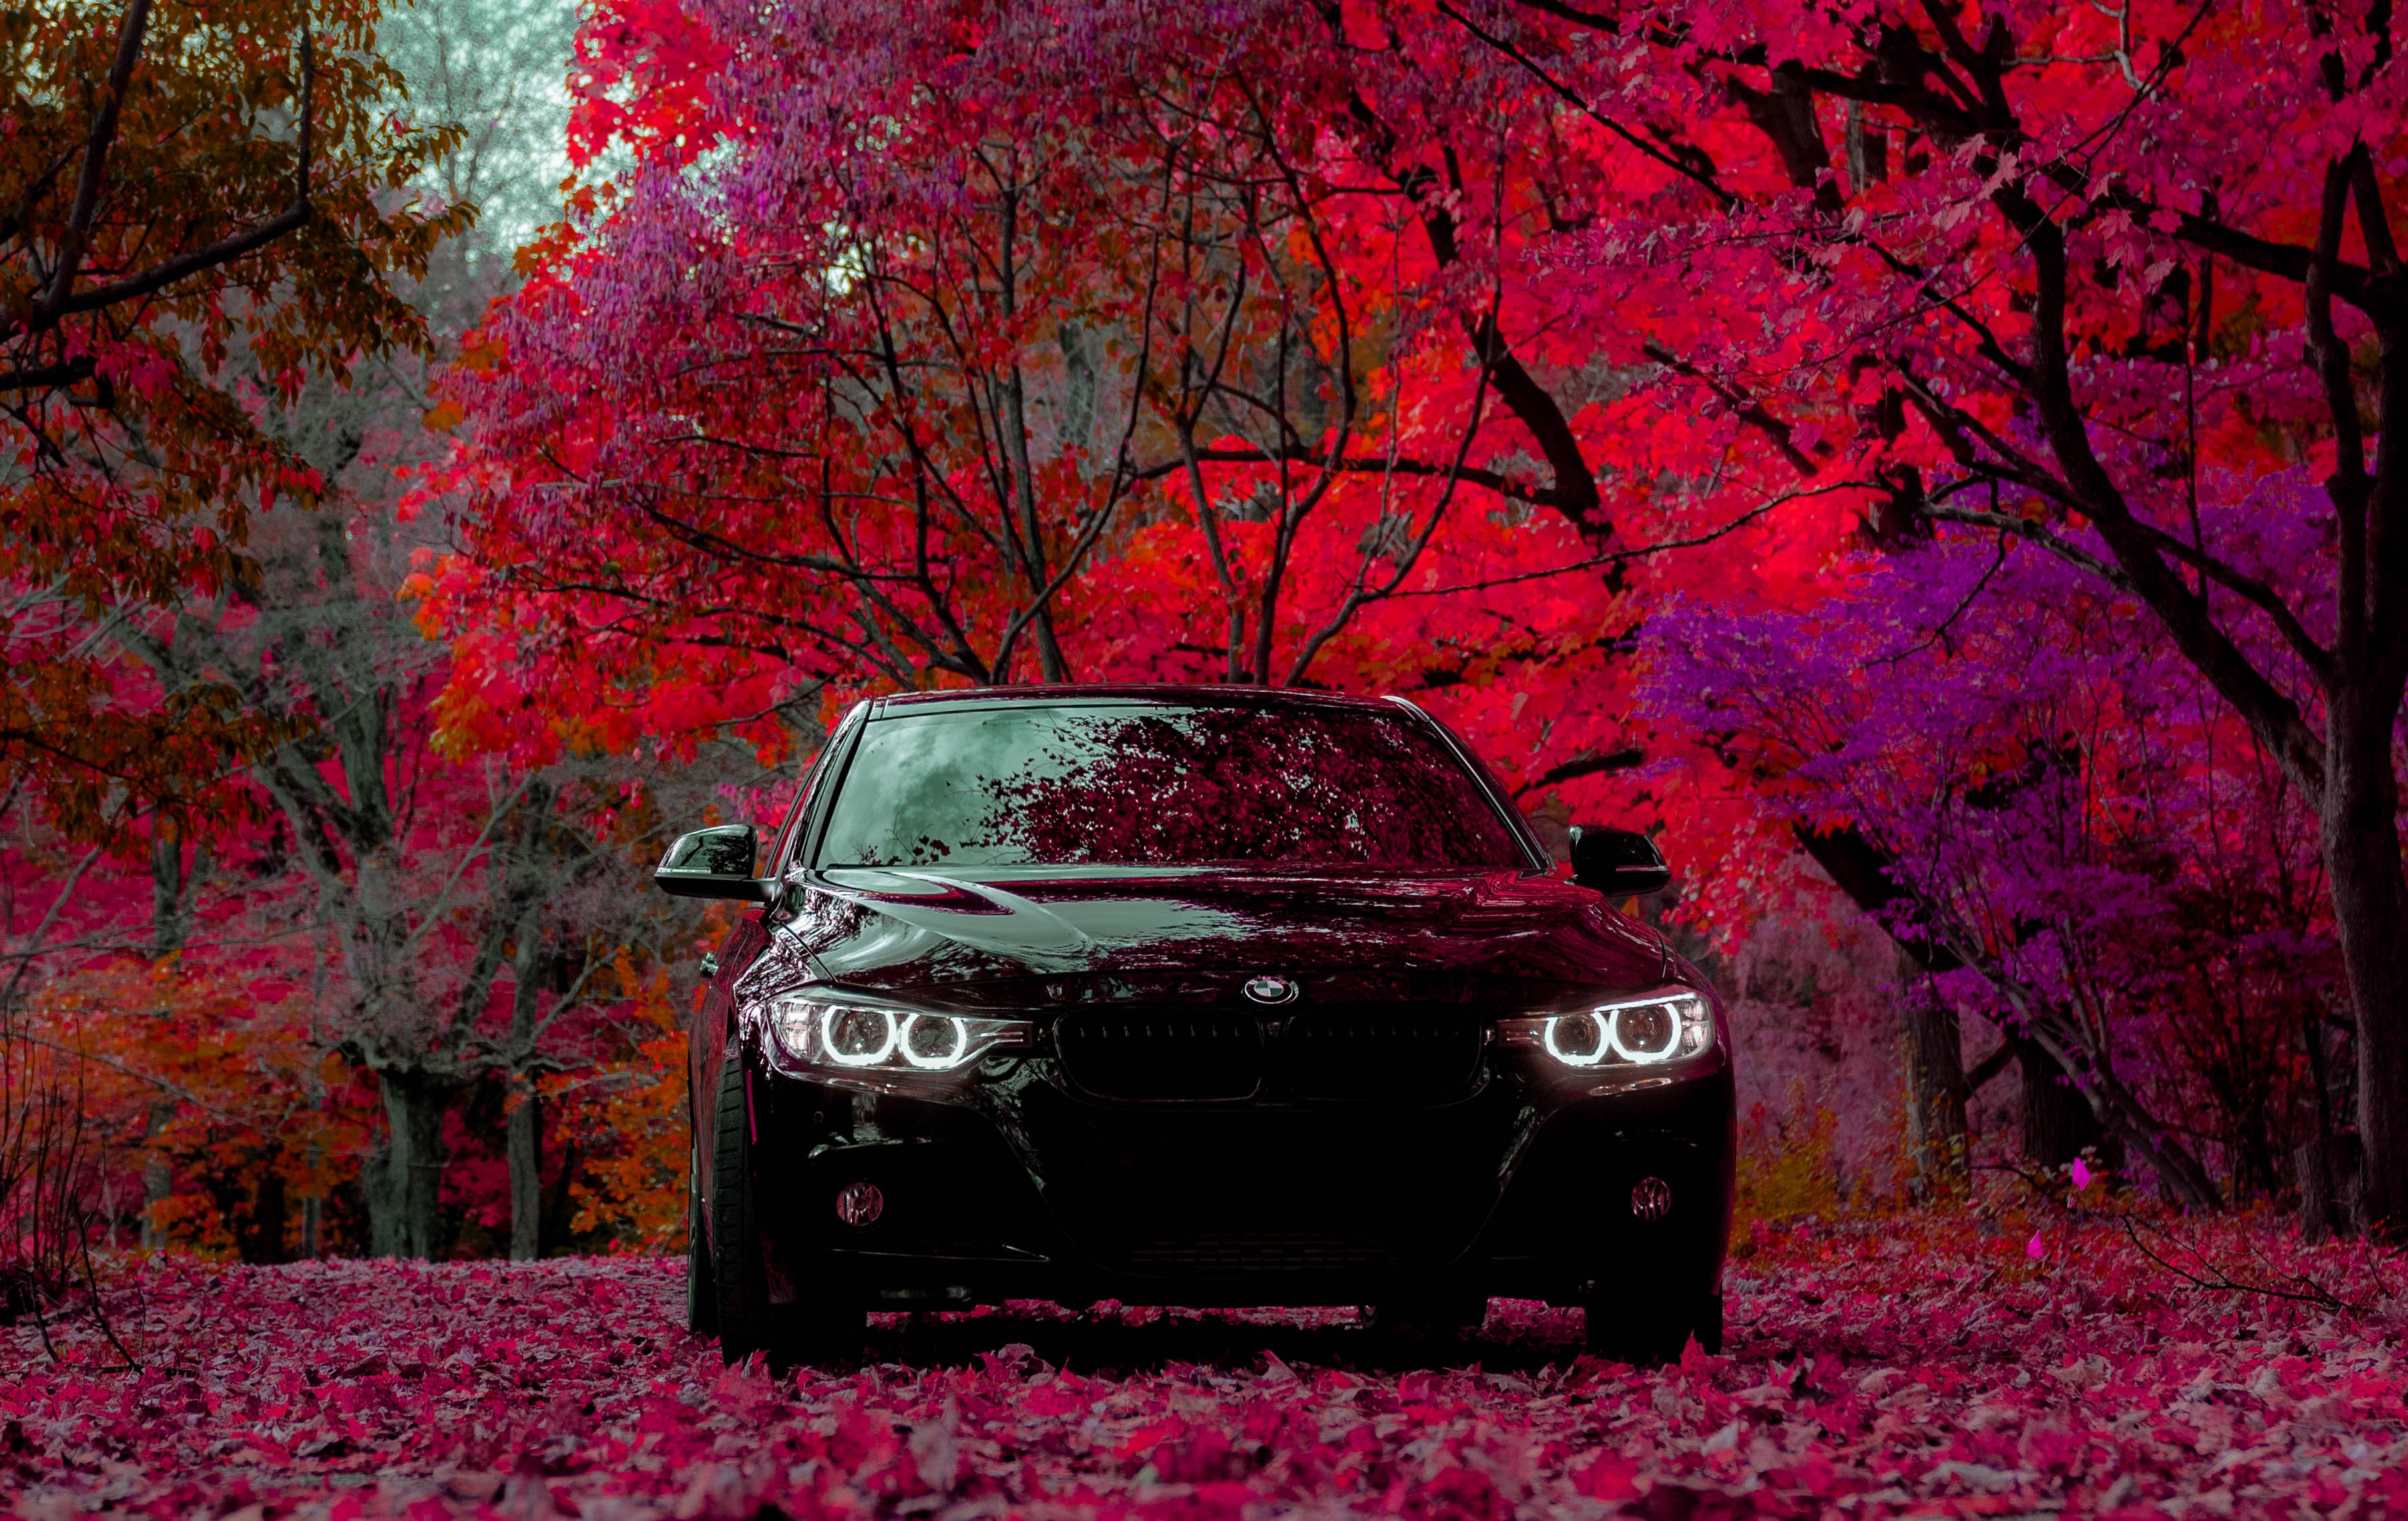 Phone Background Full HD forest, bmw f30 335i, black, front view